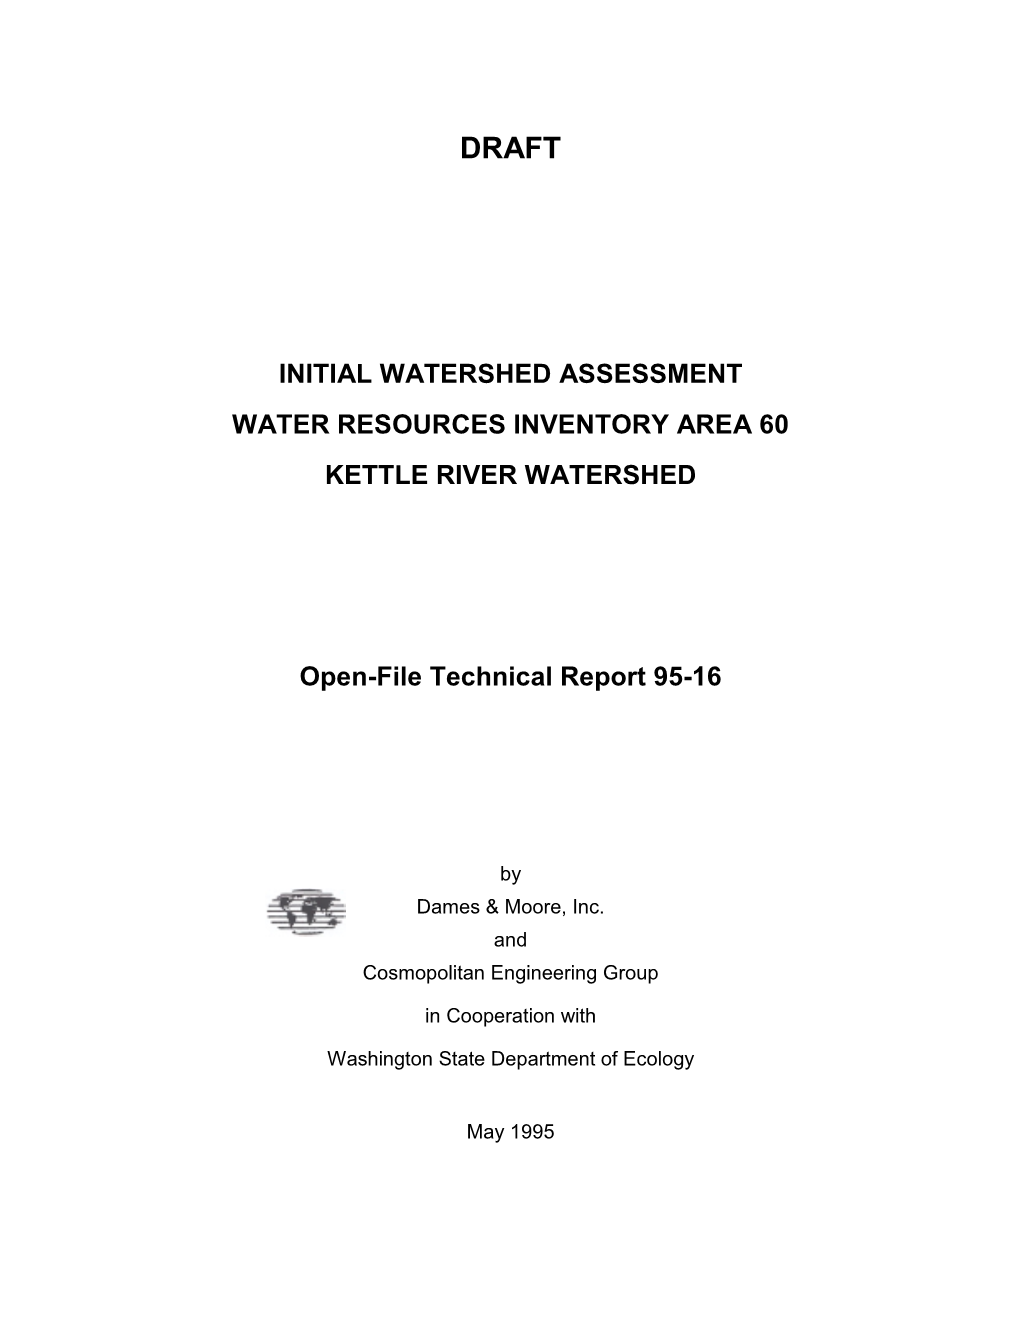 Kettle Watershed Initial Assessment